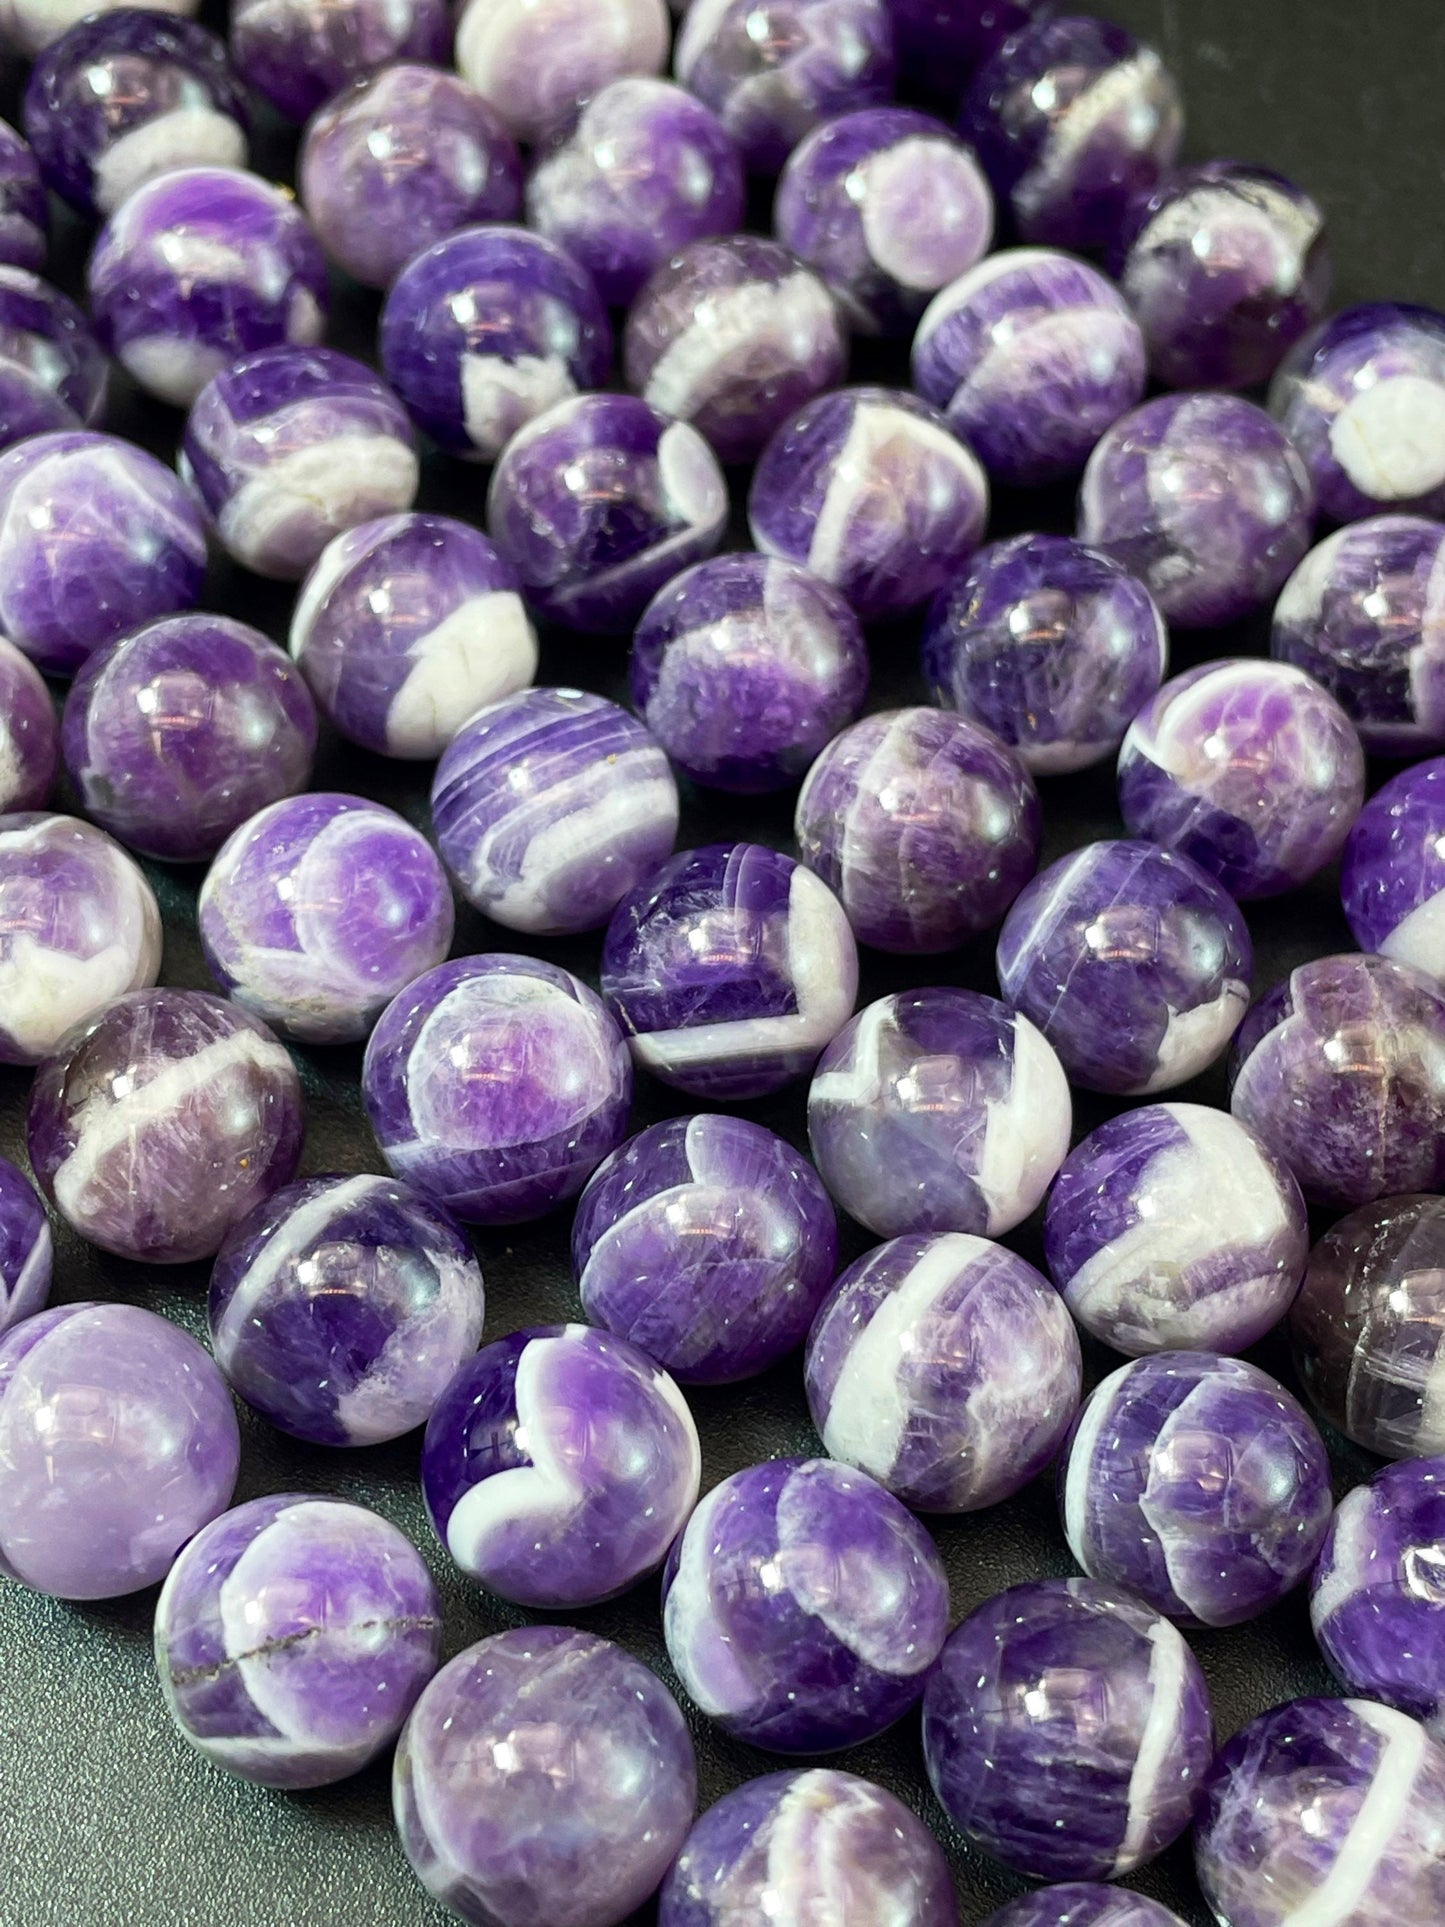 AAA Natural Flower Amethyst Gemstone Bead 6mm 8mm 10mm 12mm Round Beads, Gorgeous Natural Purple Color Amethyst Gemstone Beads